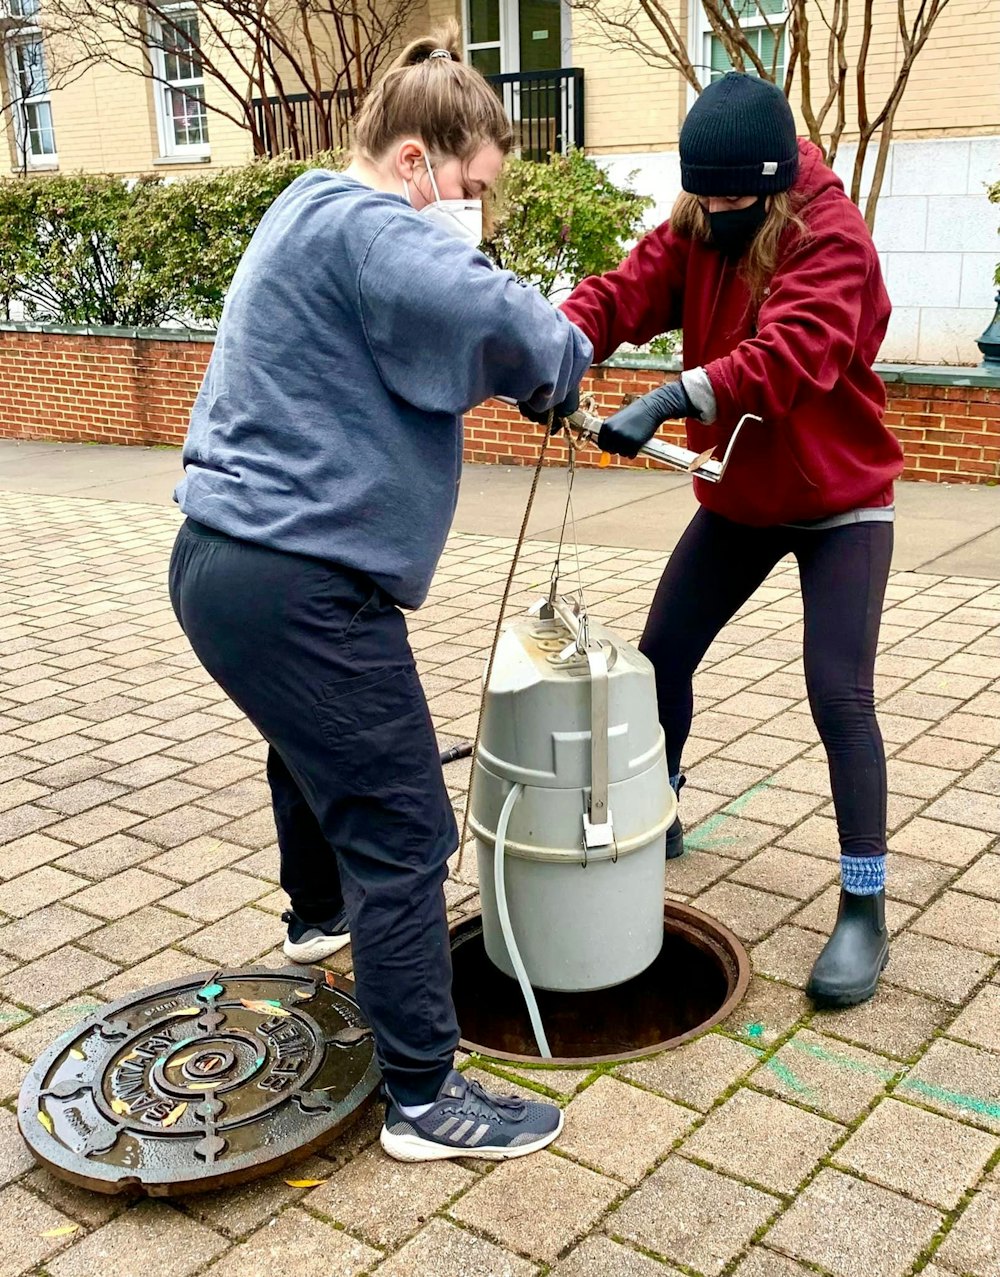 Two students wearing masks lower a Shop-Vac sized container into an open manhole.